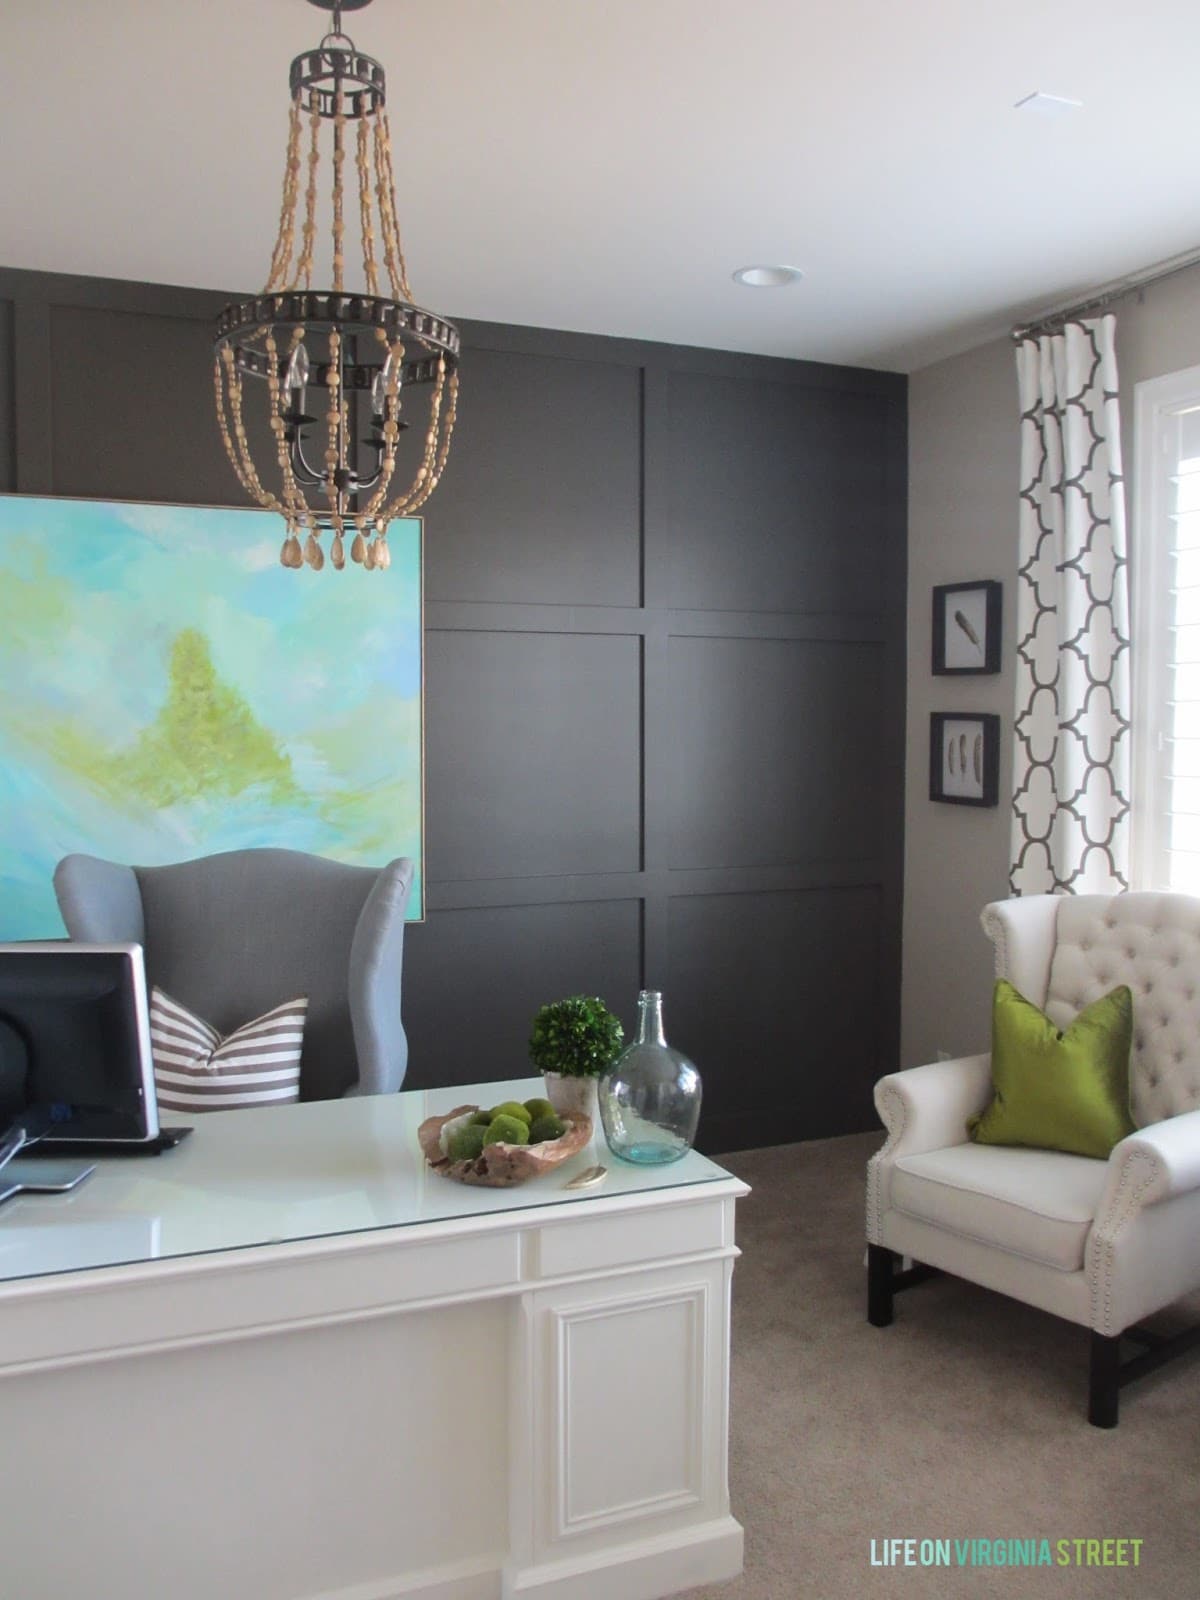 Home office makeover with Sherwin Williams Urbane Bronze board and batten wall, wood bead chandelier, and DIY abstract artwork.